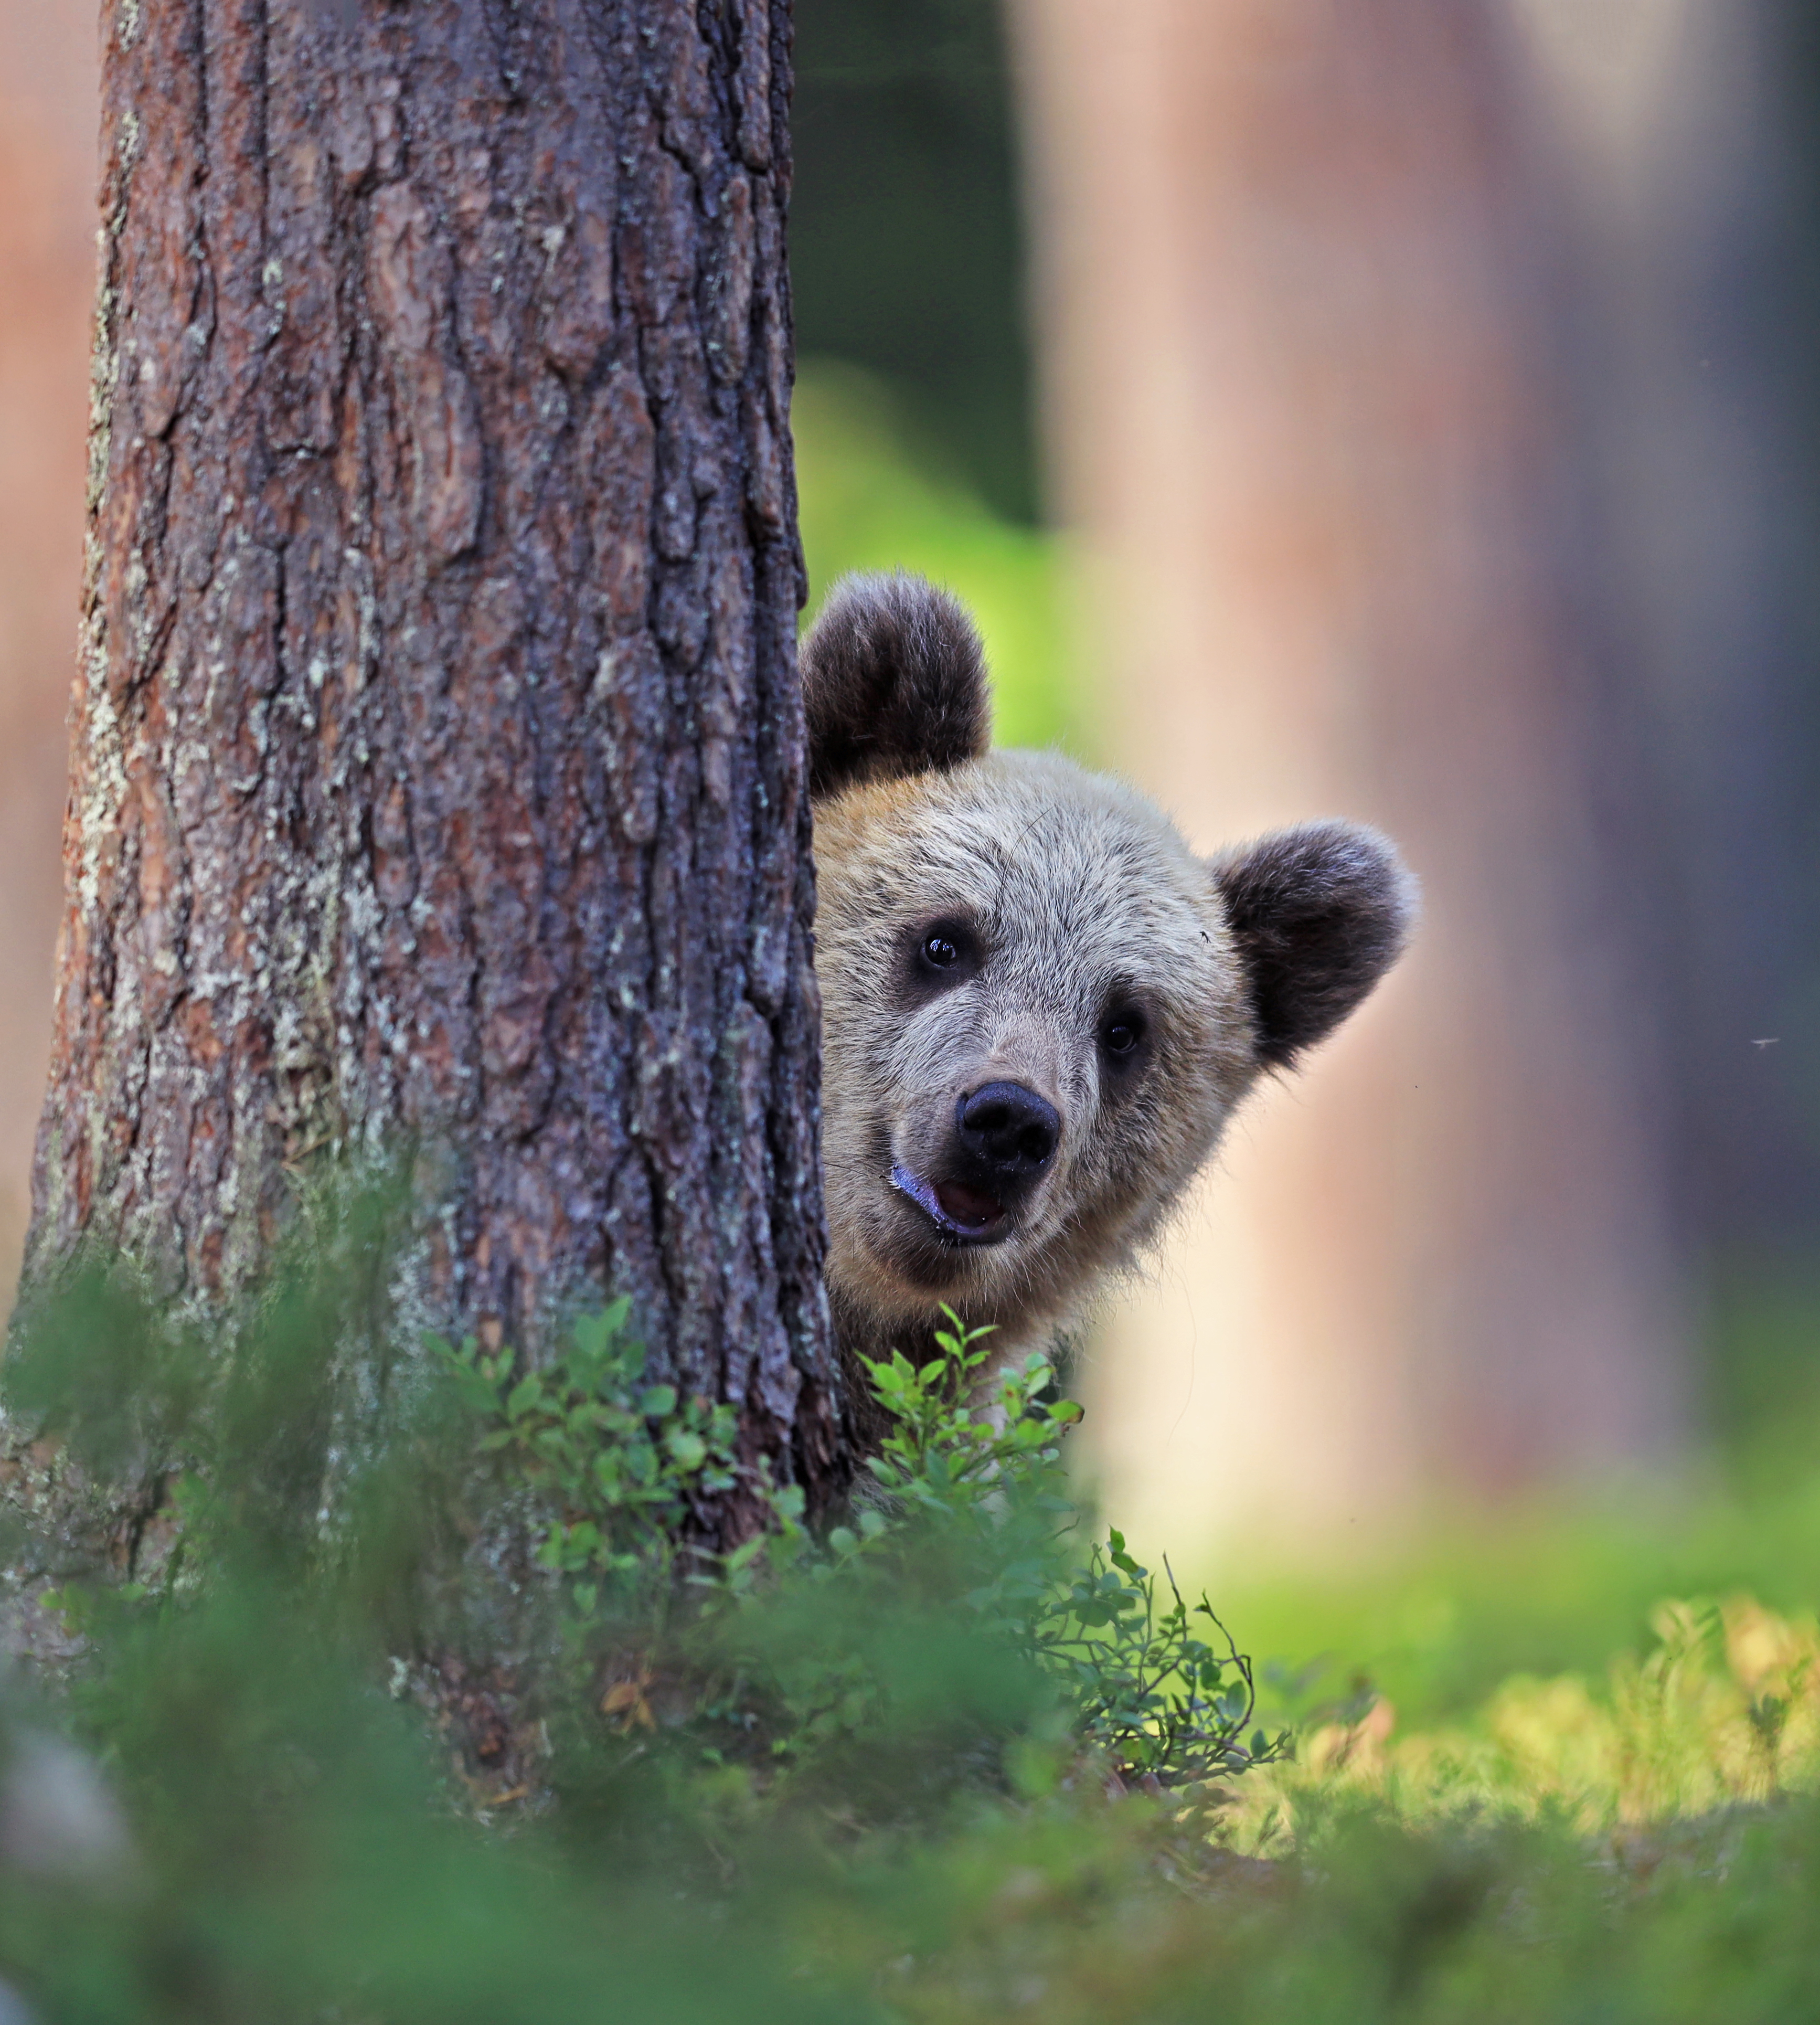 A brown bear pokes its head out from behind a tree trunk. Stares at camera. 